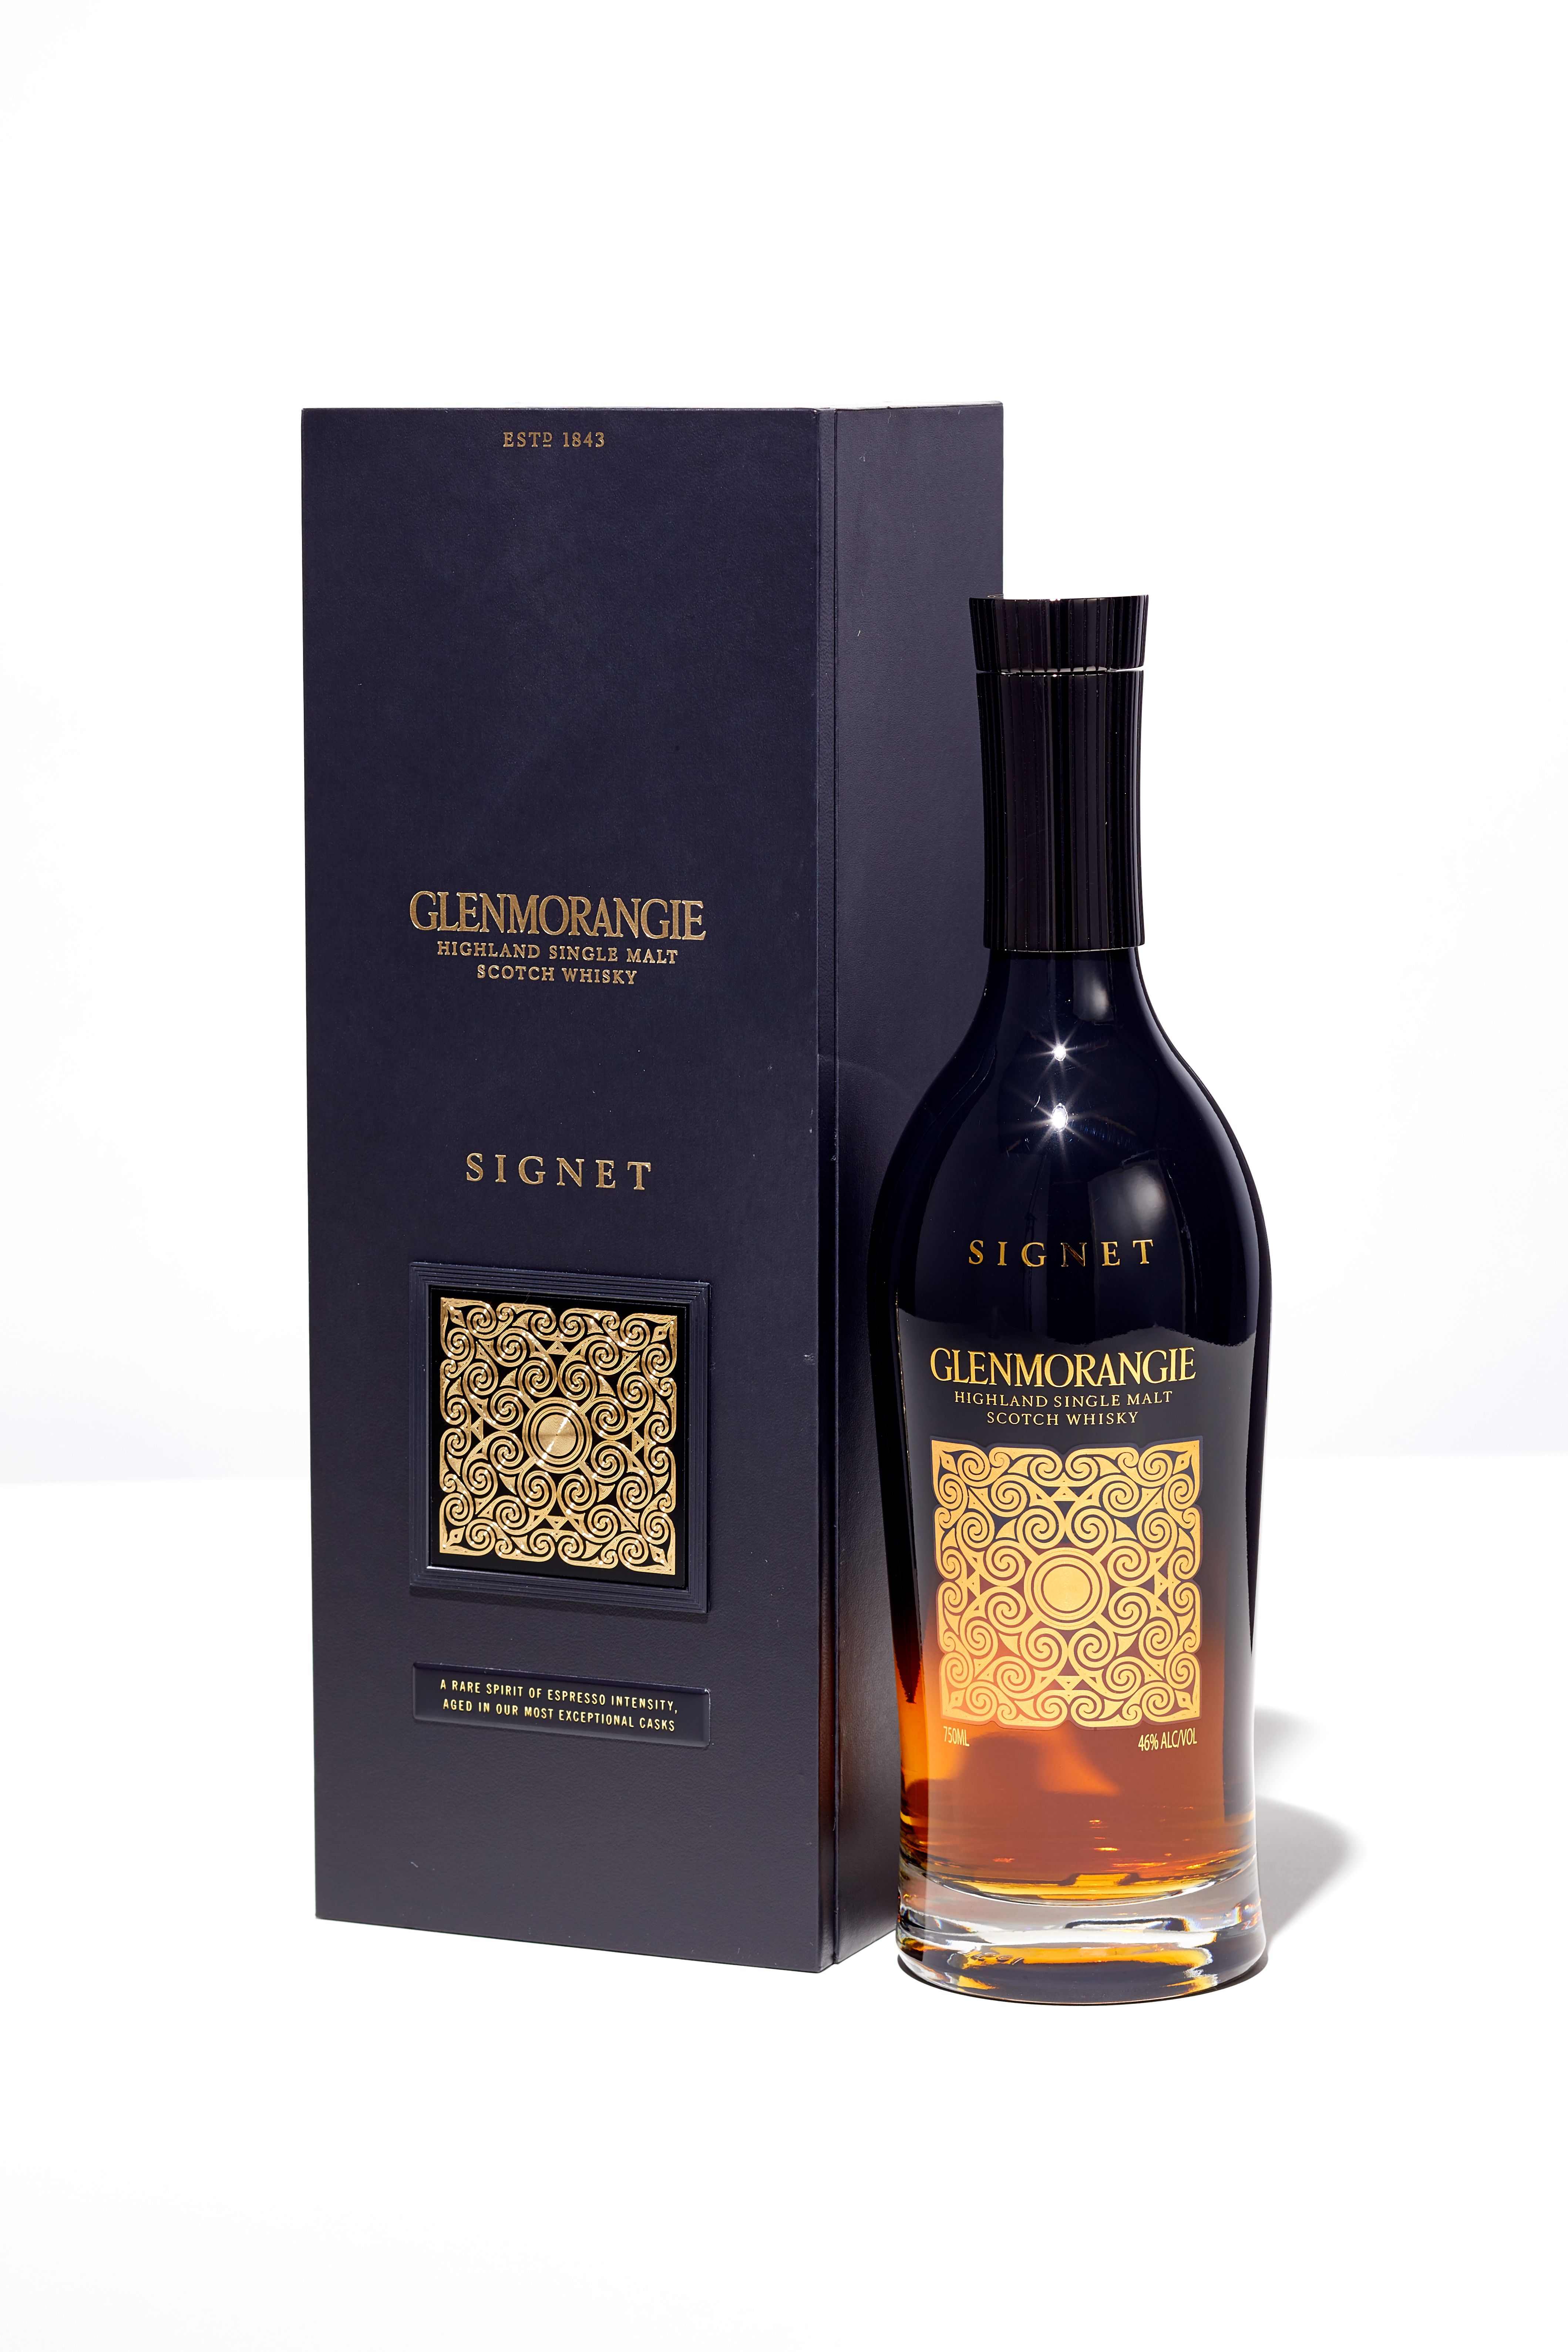 From Whisky Casks to Sunglasses - A Glenmorangie x Finlay & Co